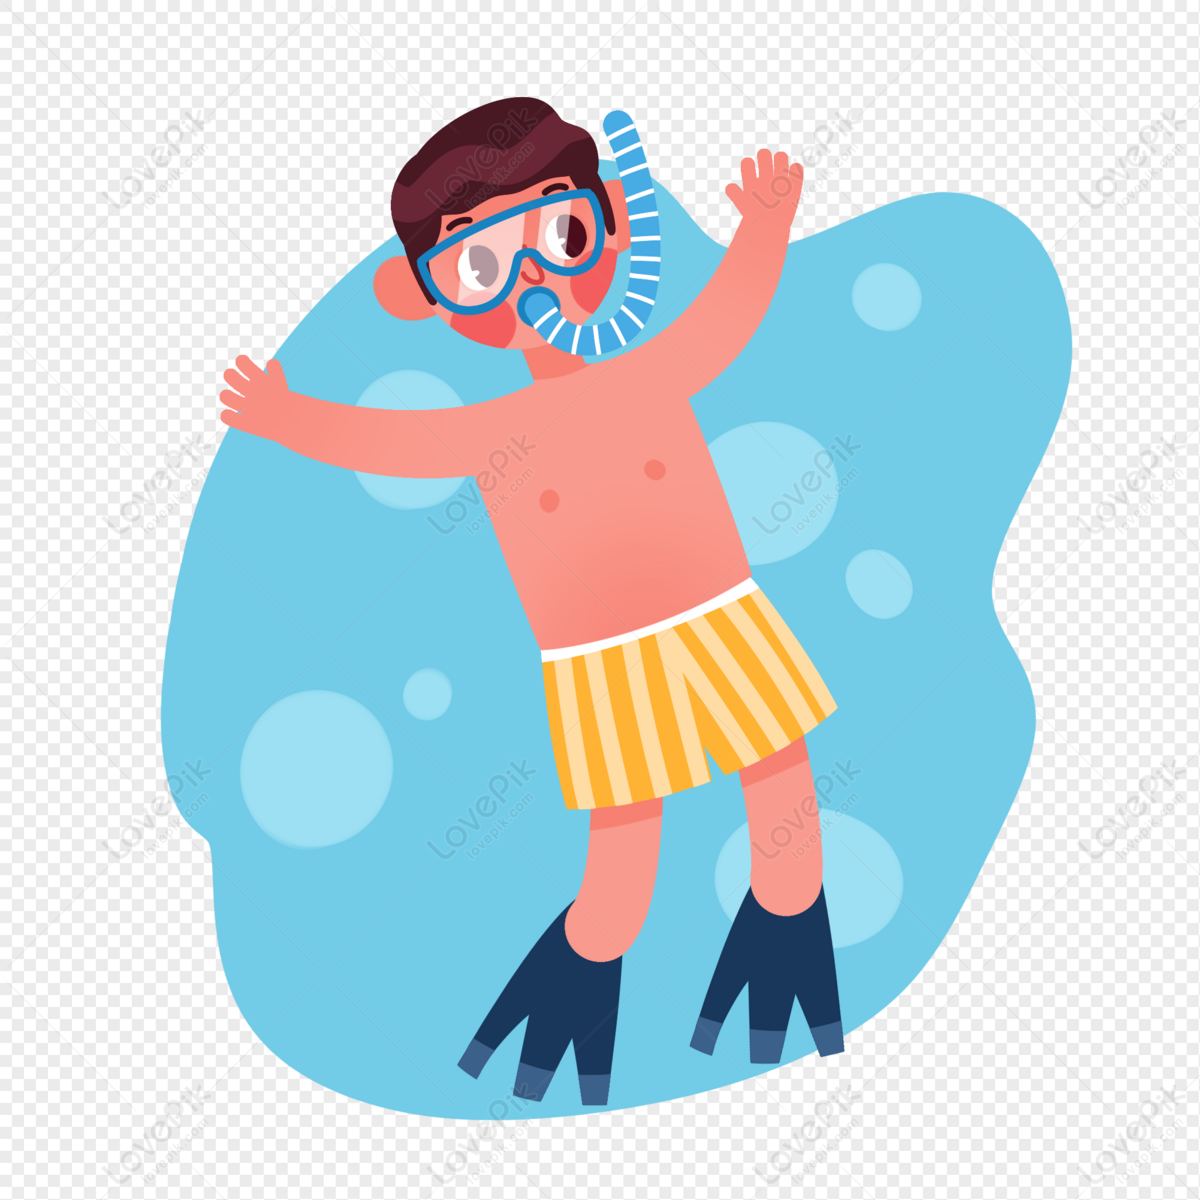 Diving Child PNG Hd Transparent Image And Clipart Image For Free ...